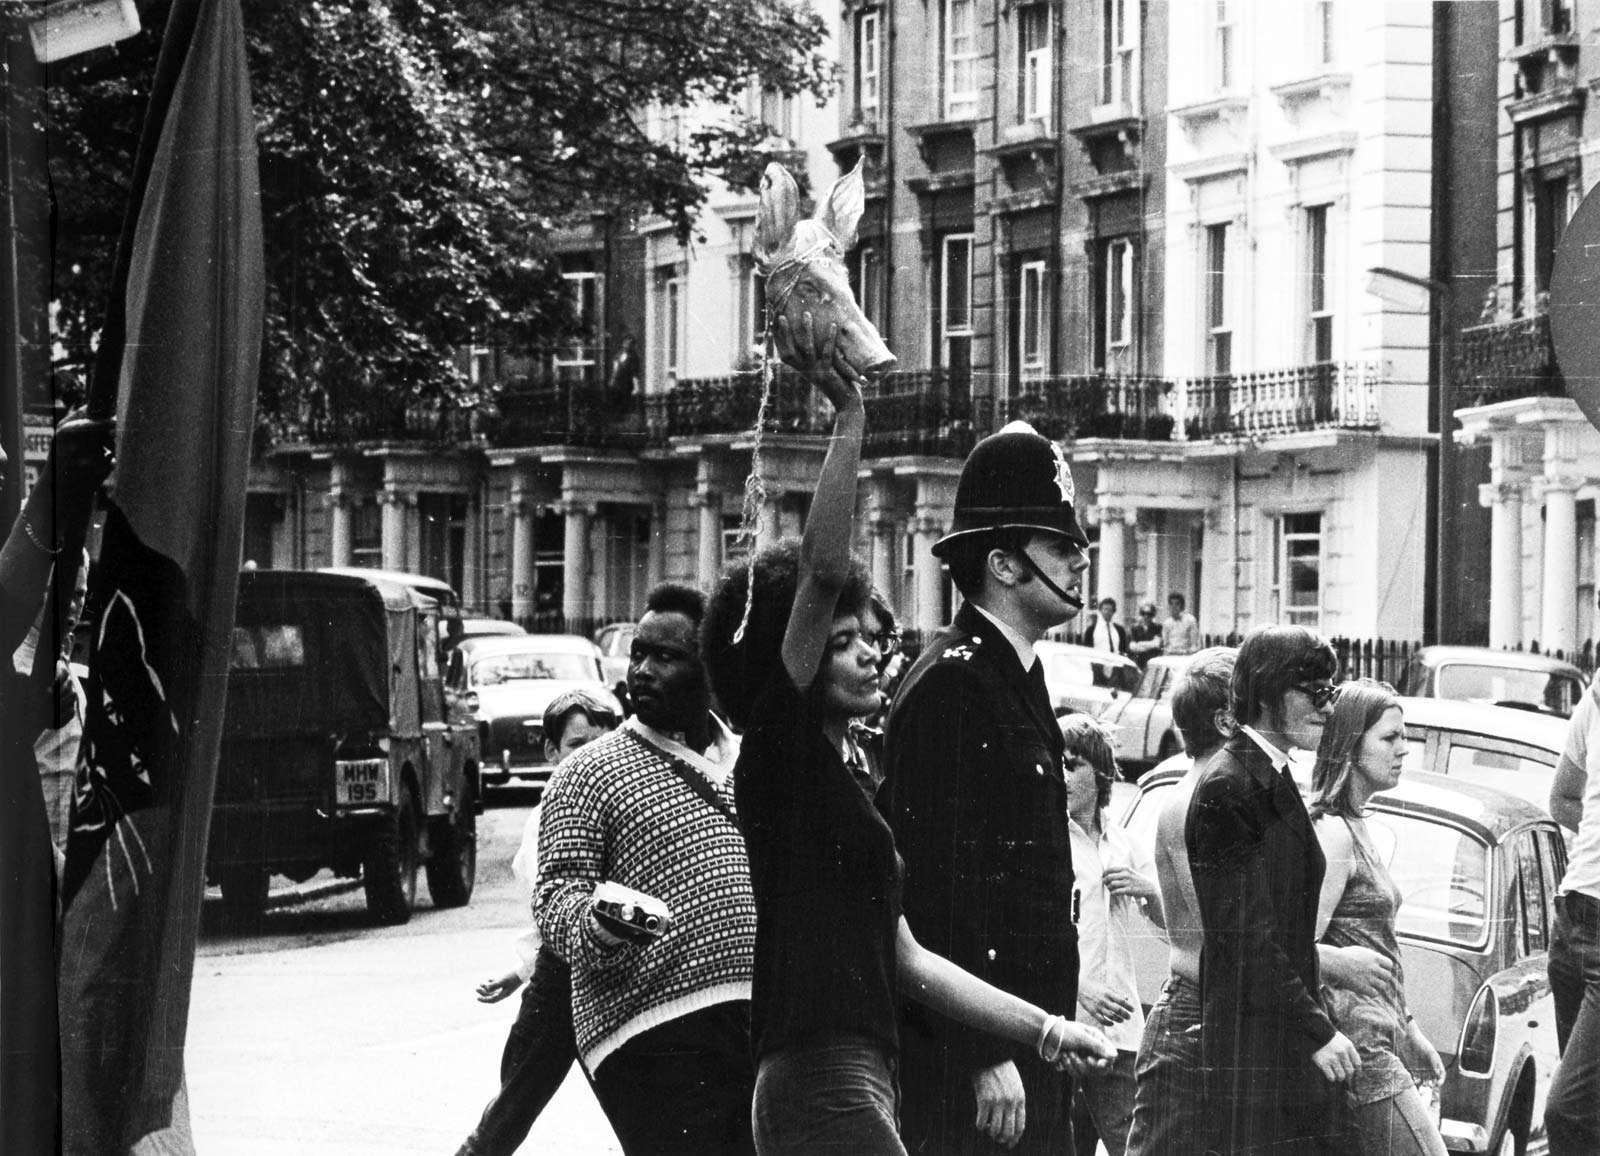 Police photograph of the demonstration in Notting Hill, 9 August 1970. Barbara Beese, who was to be charged as part of the Mangrove Nine, is holding the pig’s head. Image National Archives.